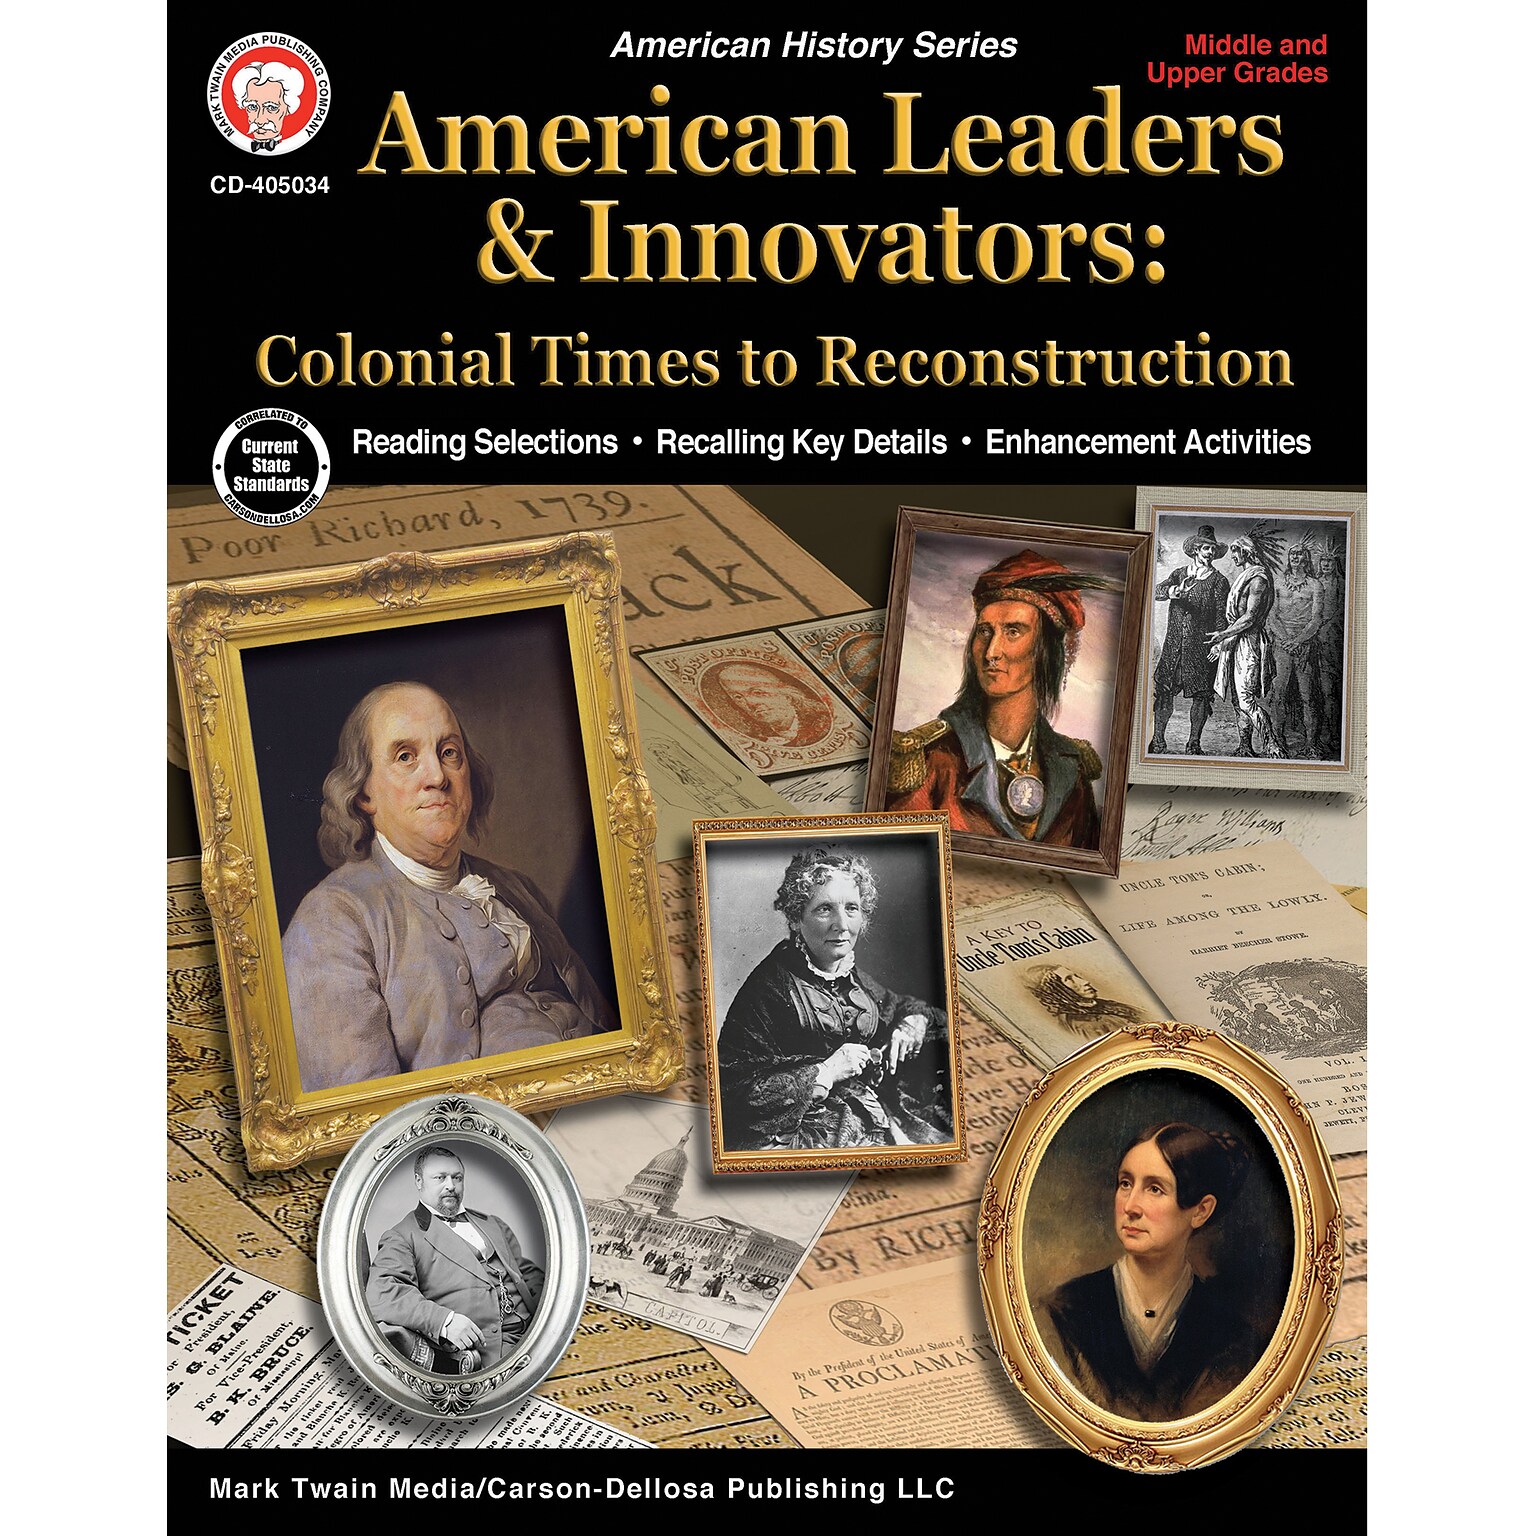 American Leaders & Innovators Colonial Times to Reconstruction Workbook by Victor Hicken, Paperback (405034)